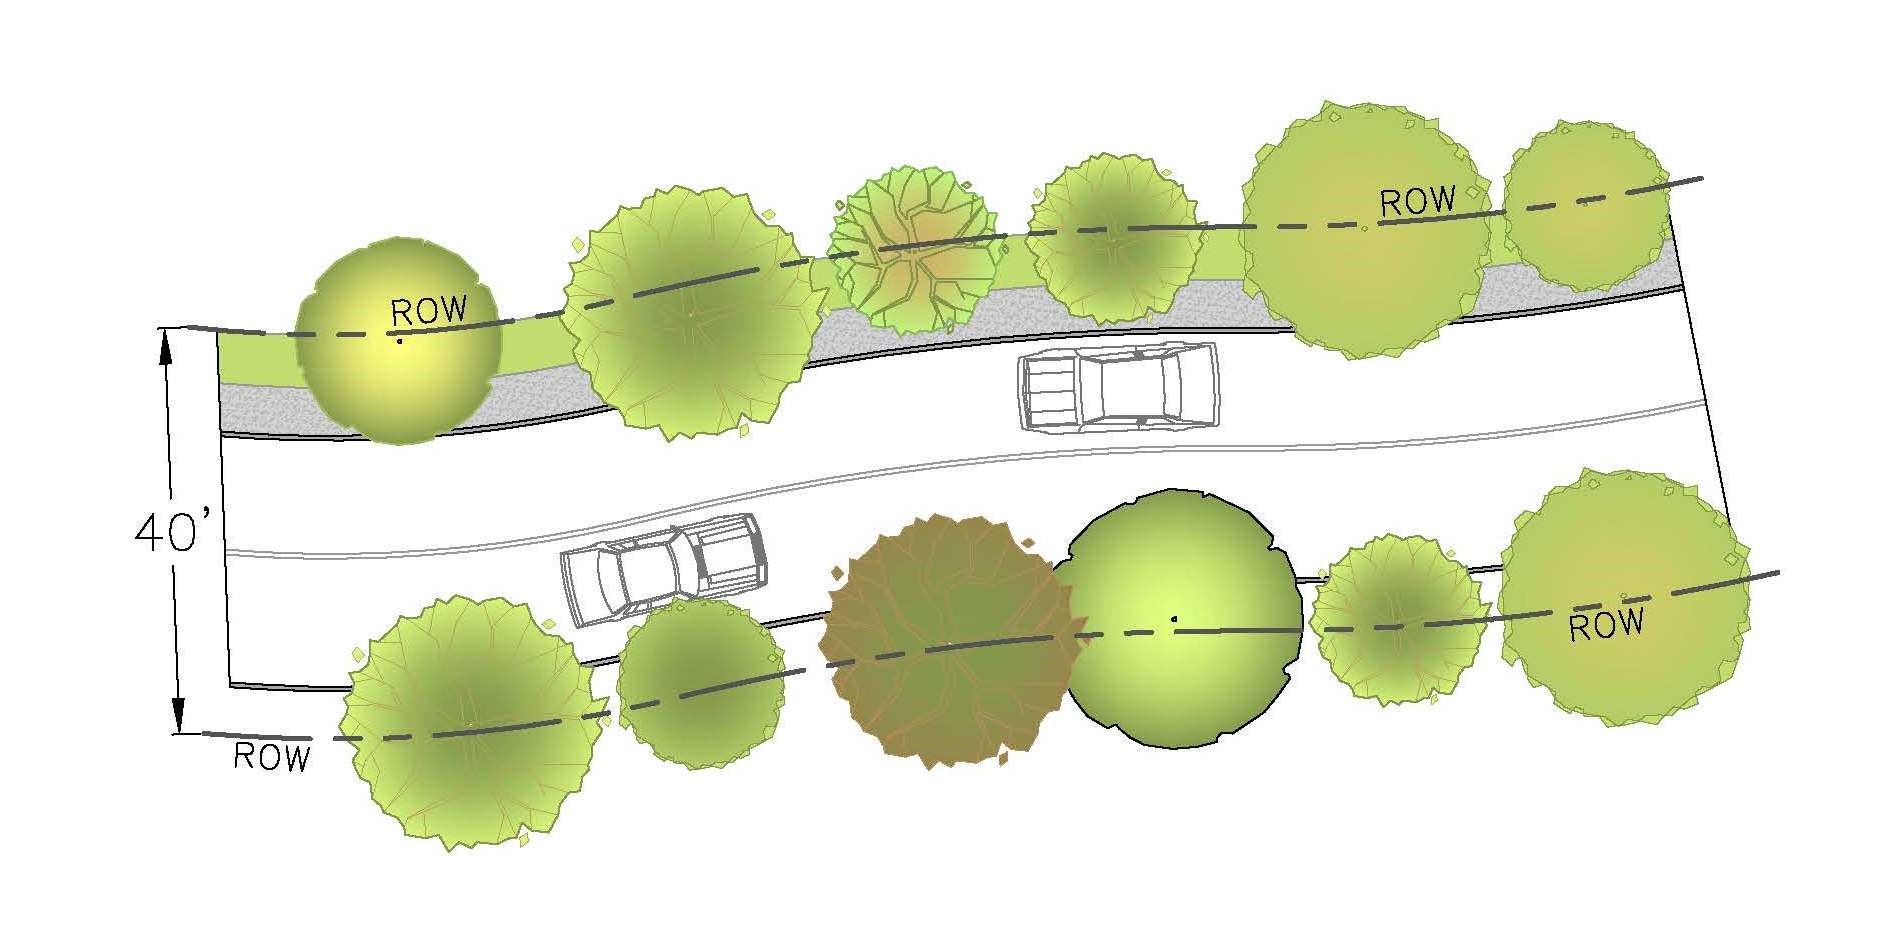 Large Trees on Both Sides of Road - Typical Plan